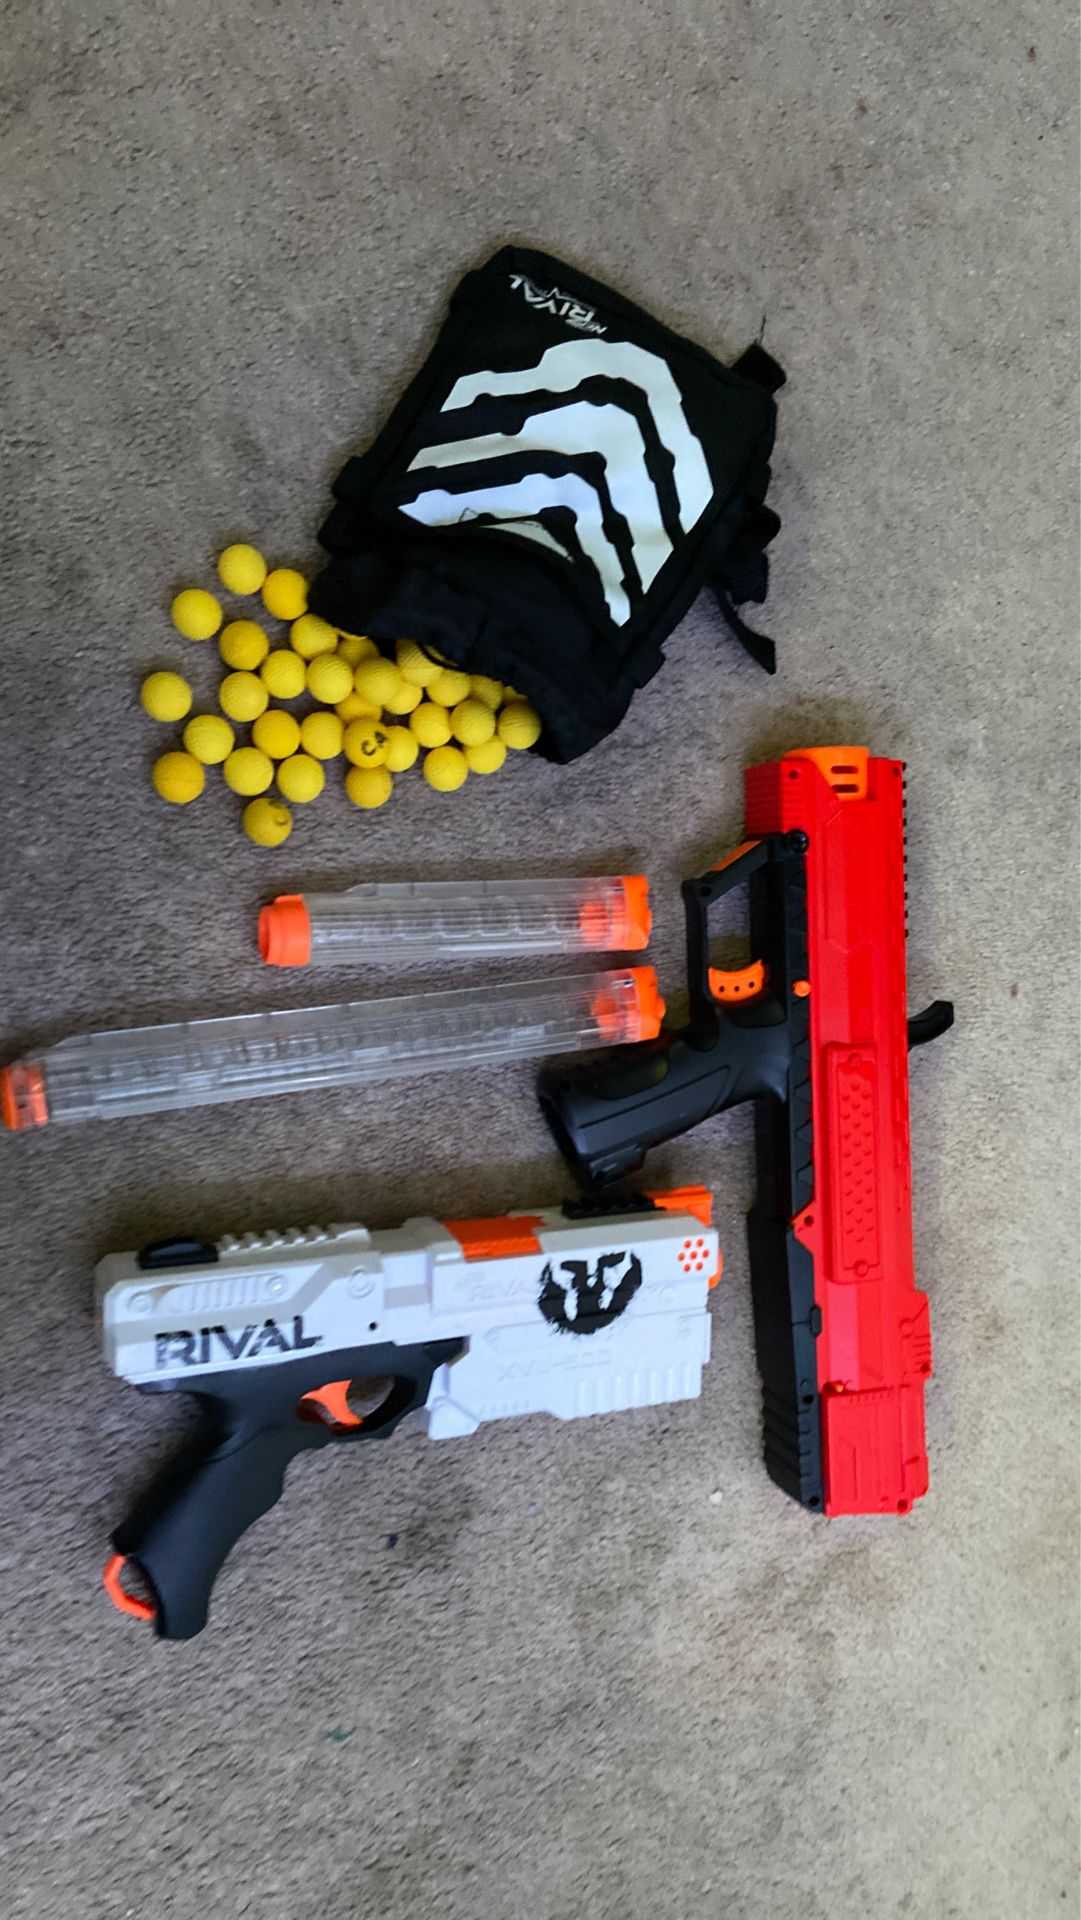 Nerf Rival guns and accessories